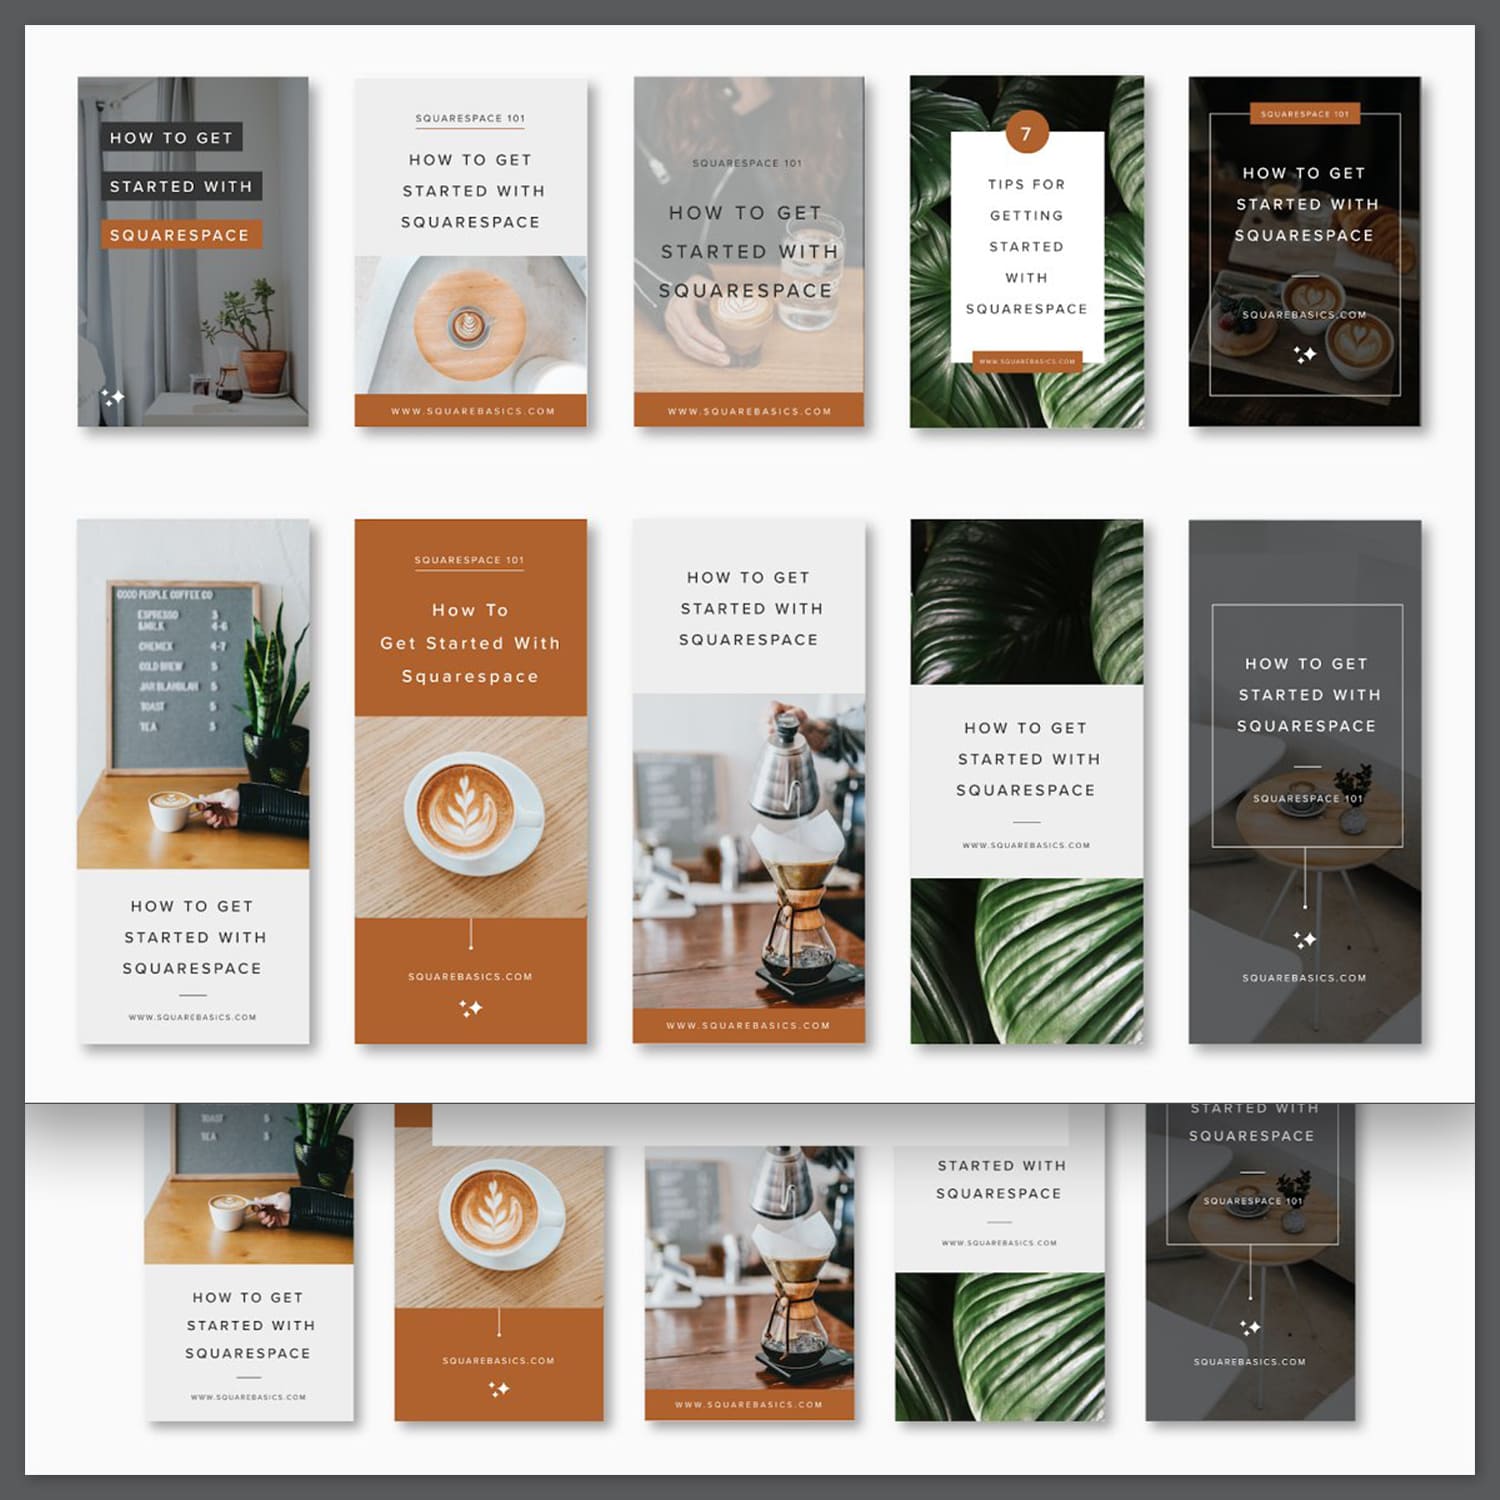 10 Pinterest Graphics for Blog Posts cover image.